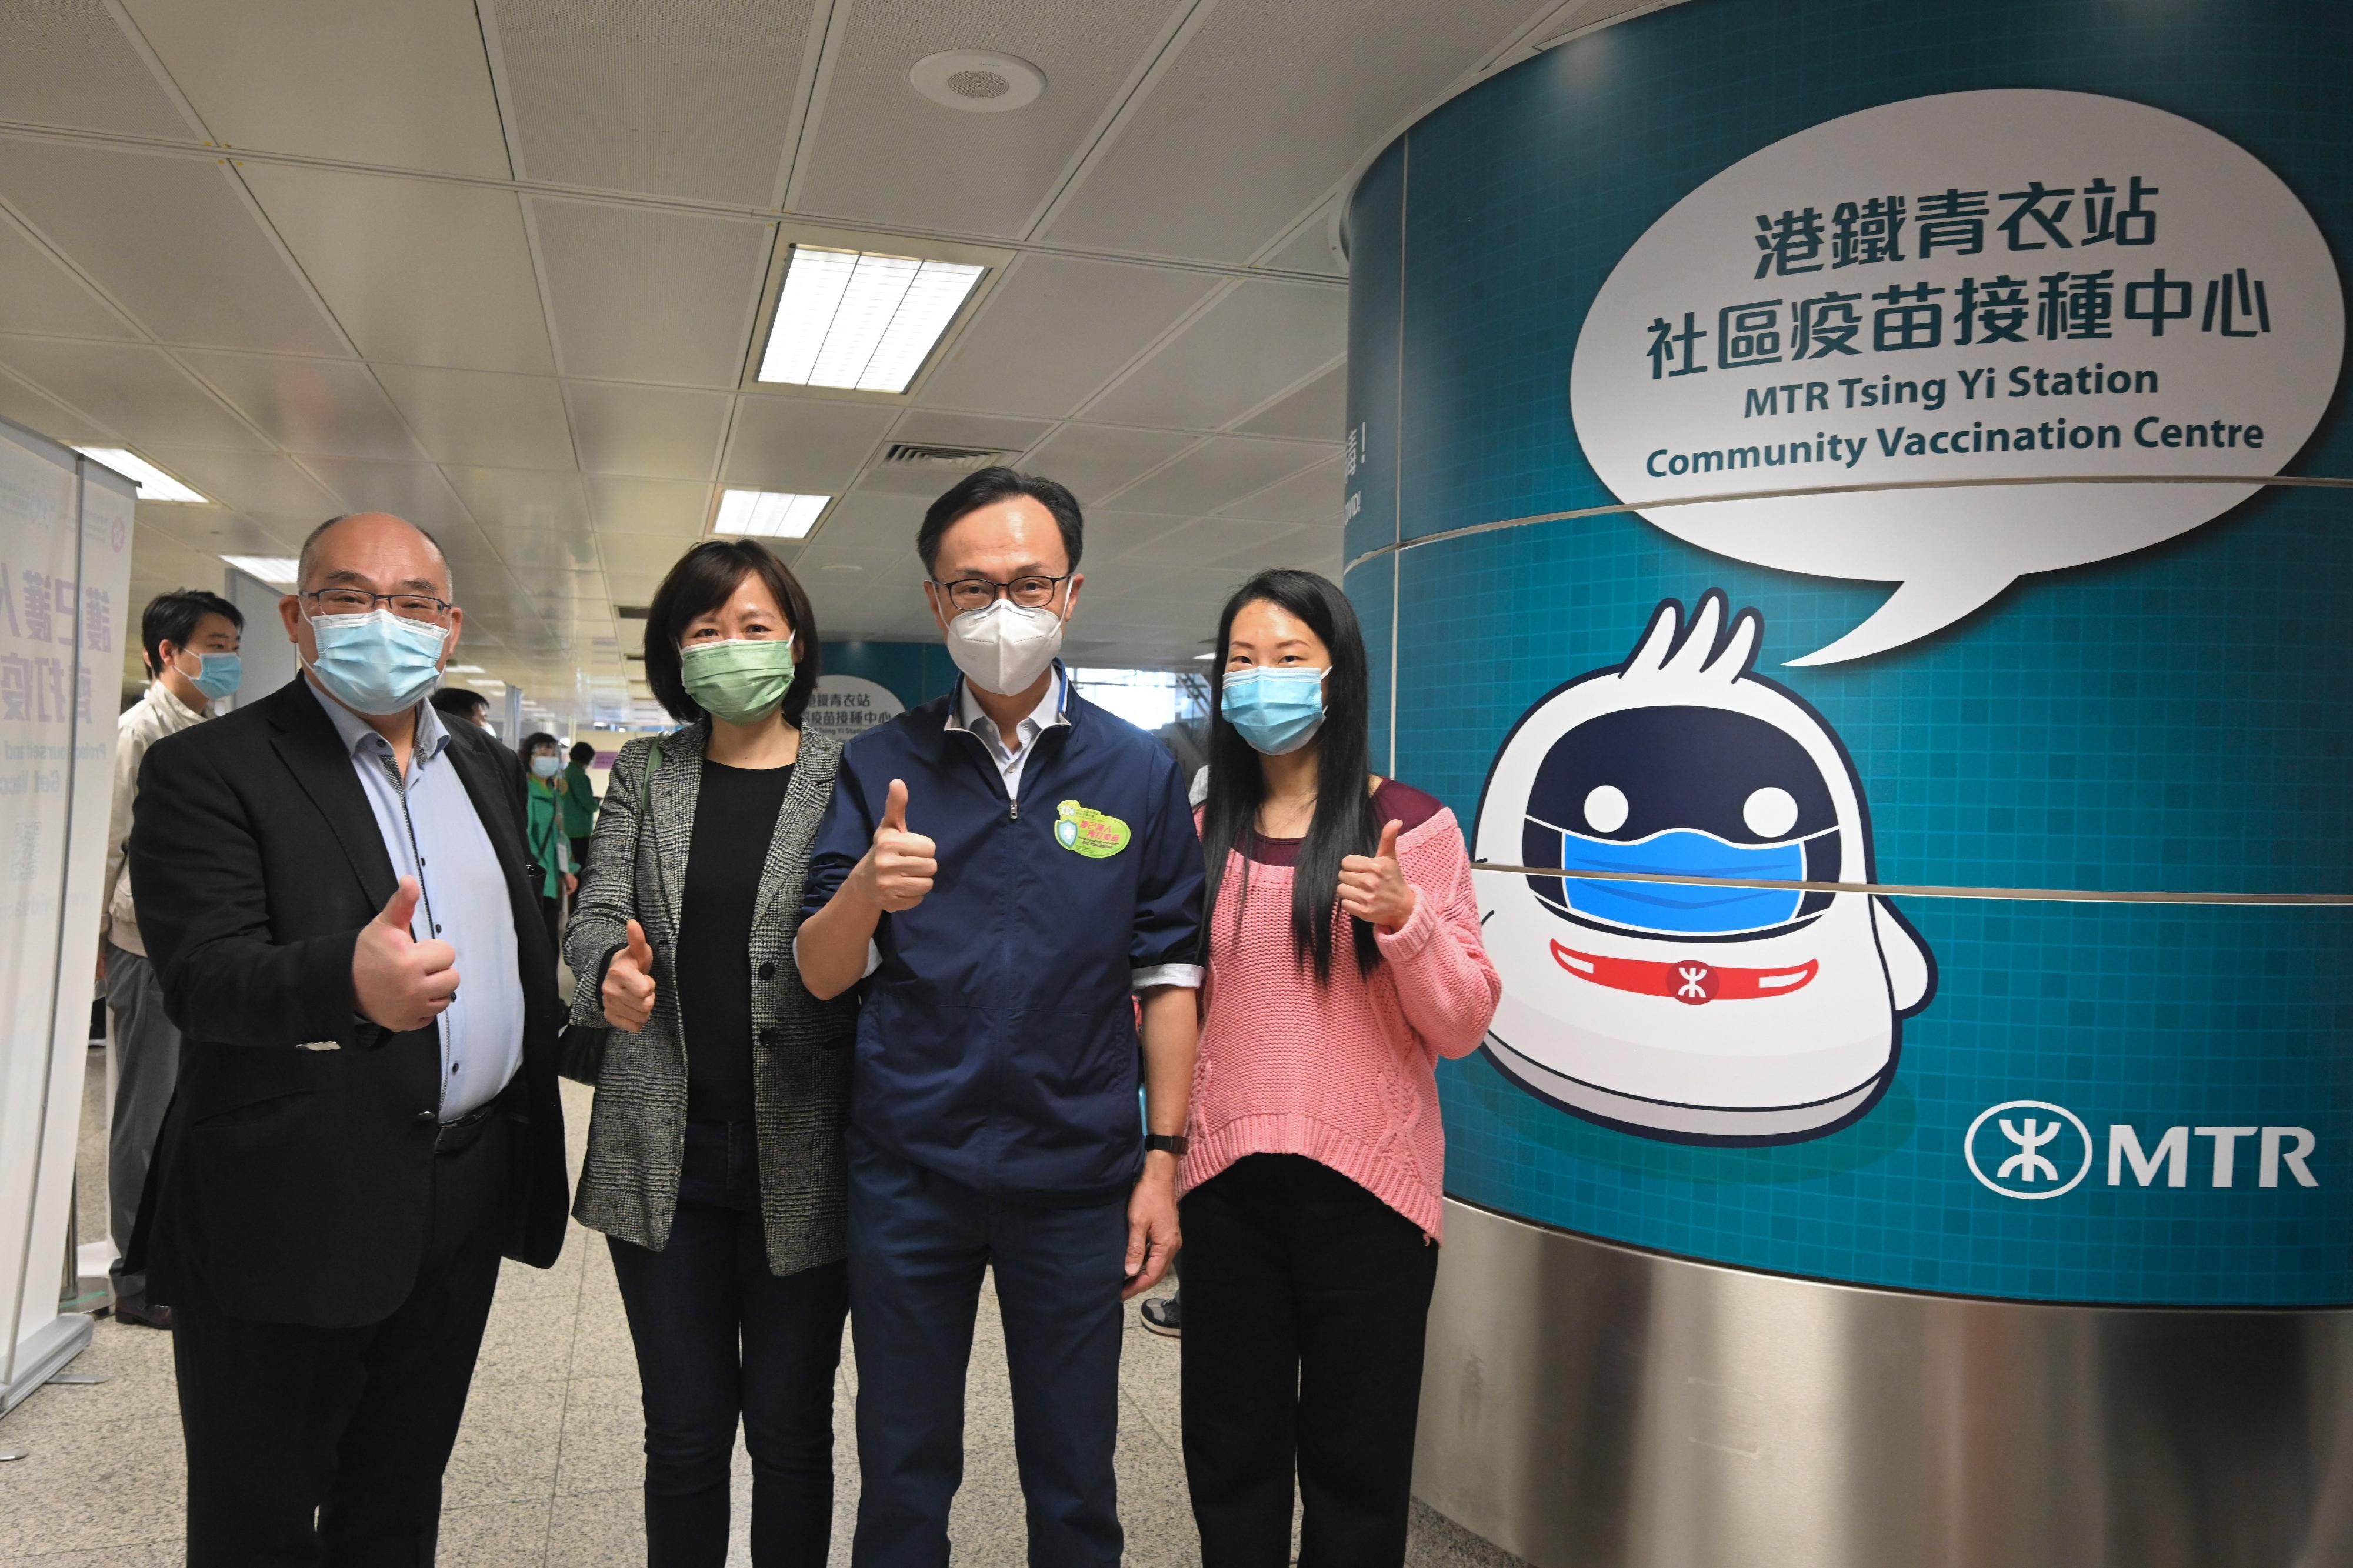 The Secretary for the Civil Service, Mr Patrick Nip, today (March 12) went to Tsing Yi to inspect the operation of the MTR Tsing Yi Station Community Vaccination Centre (CVC). Mr Nip (second right) is pictured with the Hong Kong Transport Services Director of the MTR Corporation, Ms Jeny Yeung (second left), the Operations Director of the MTR Corporation, Dr Tony Lee (first left), and a representative of the medical team of the CVC, showing their support for the COVID-19 Vaccination Programme.